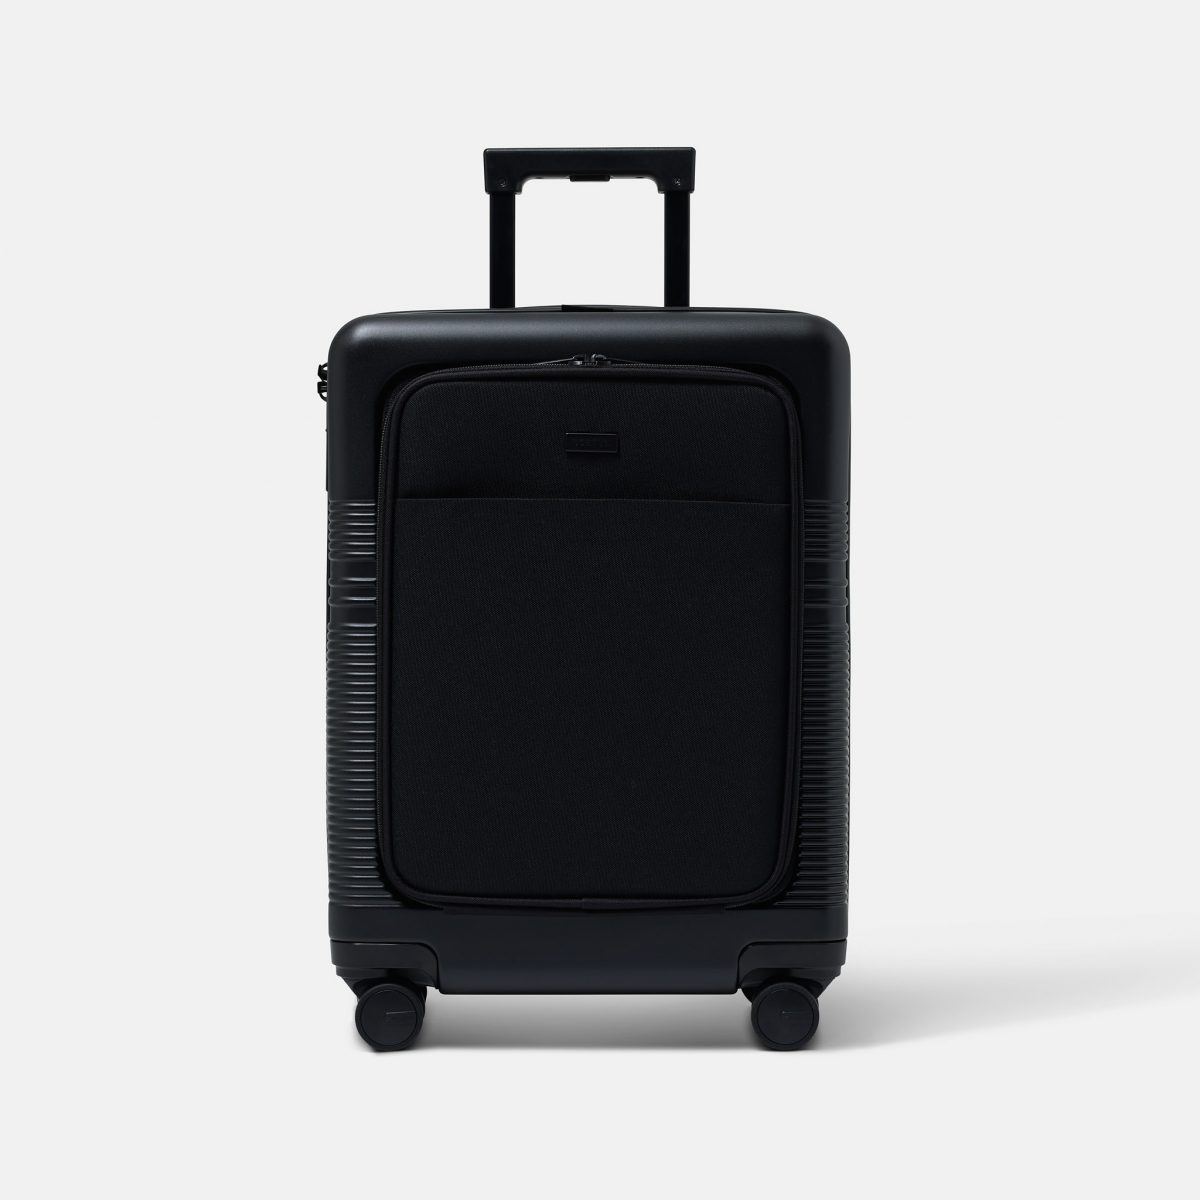 NORTVI sustainable design black suitcase with laptop compartment made of durable material. Perfect travel trolley to use as hand luggage.